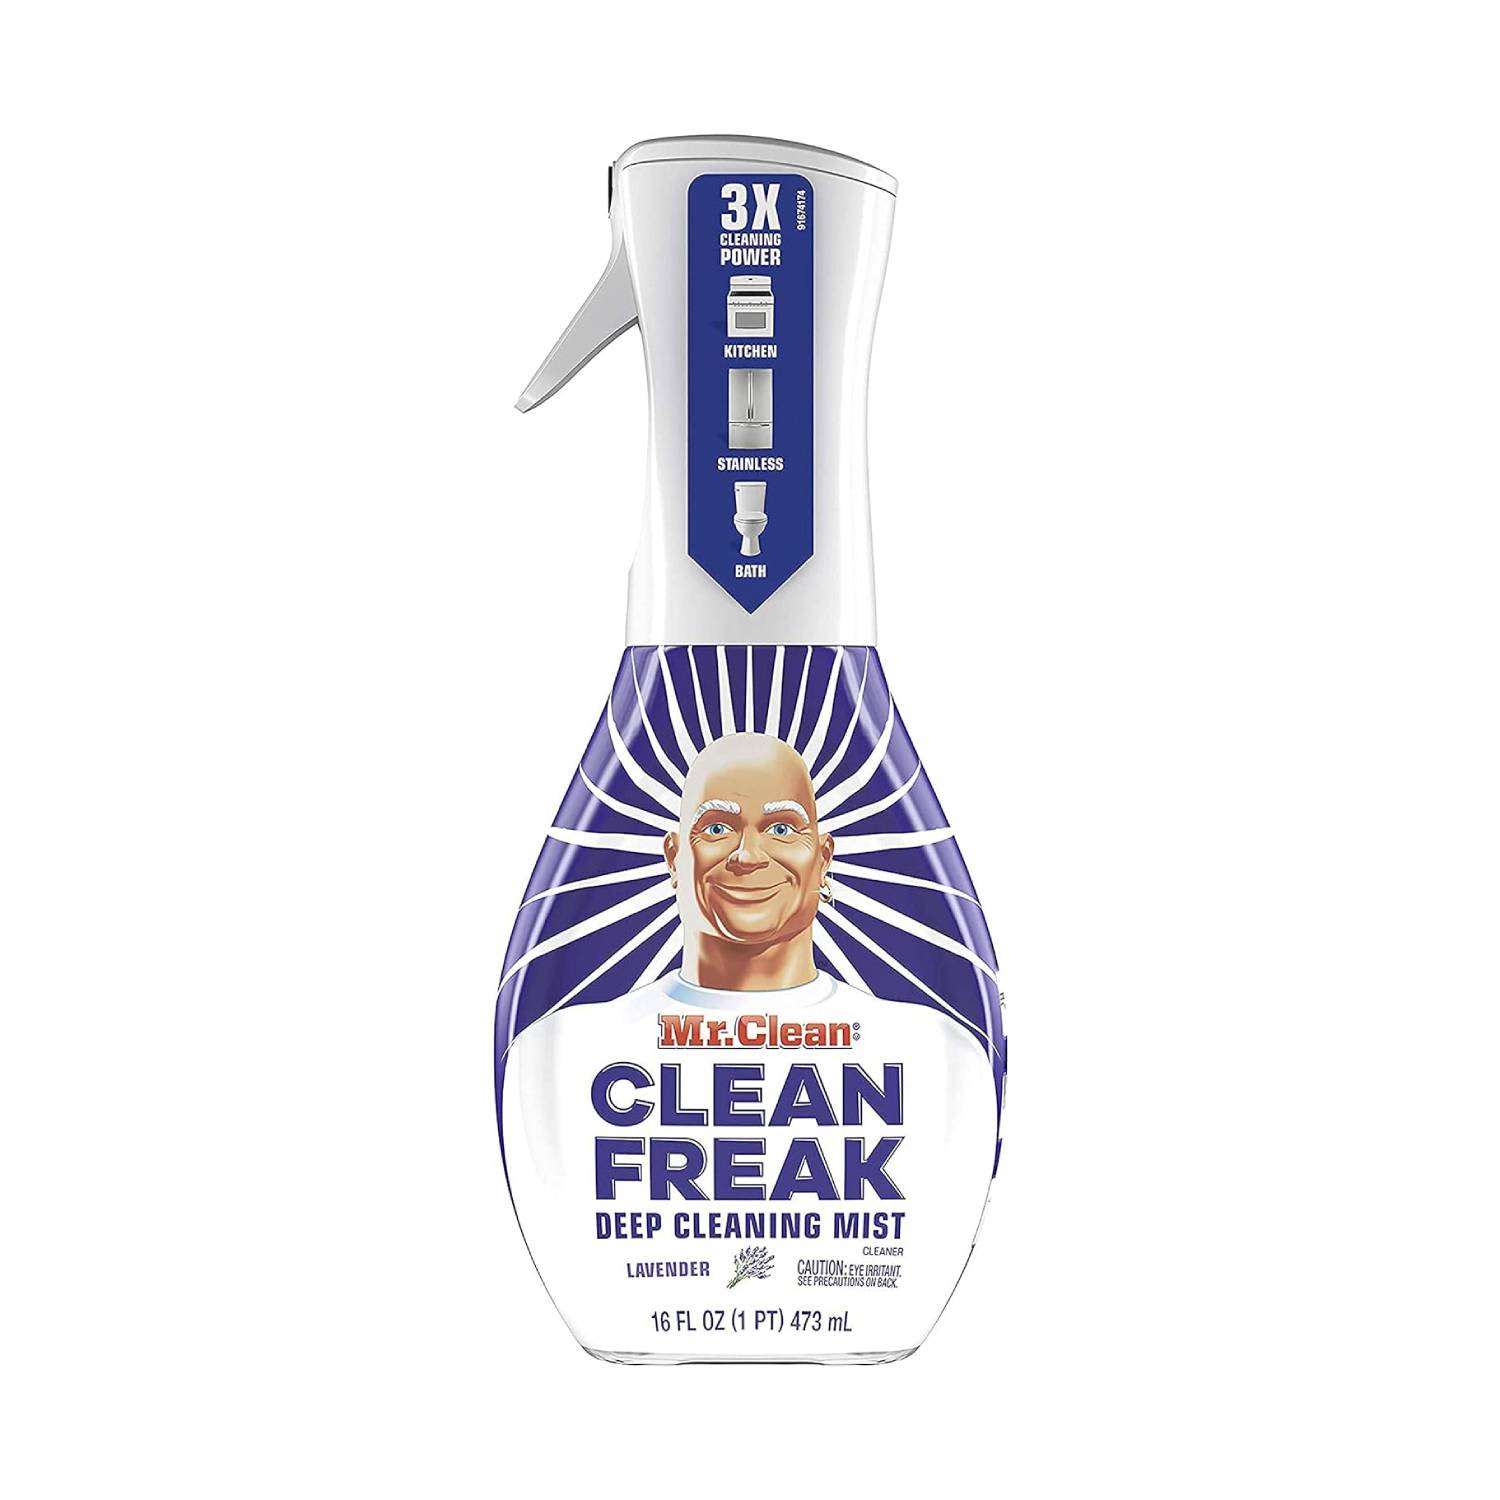 Clean Freak All Purpose Cleaner  Vital Living Herbs And Nutrition